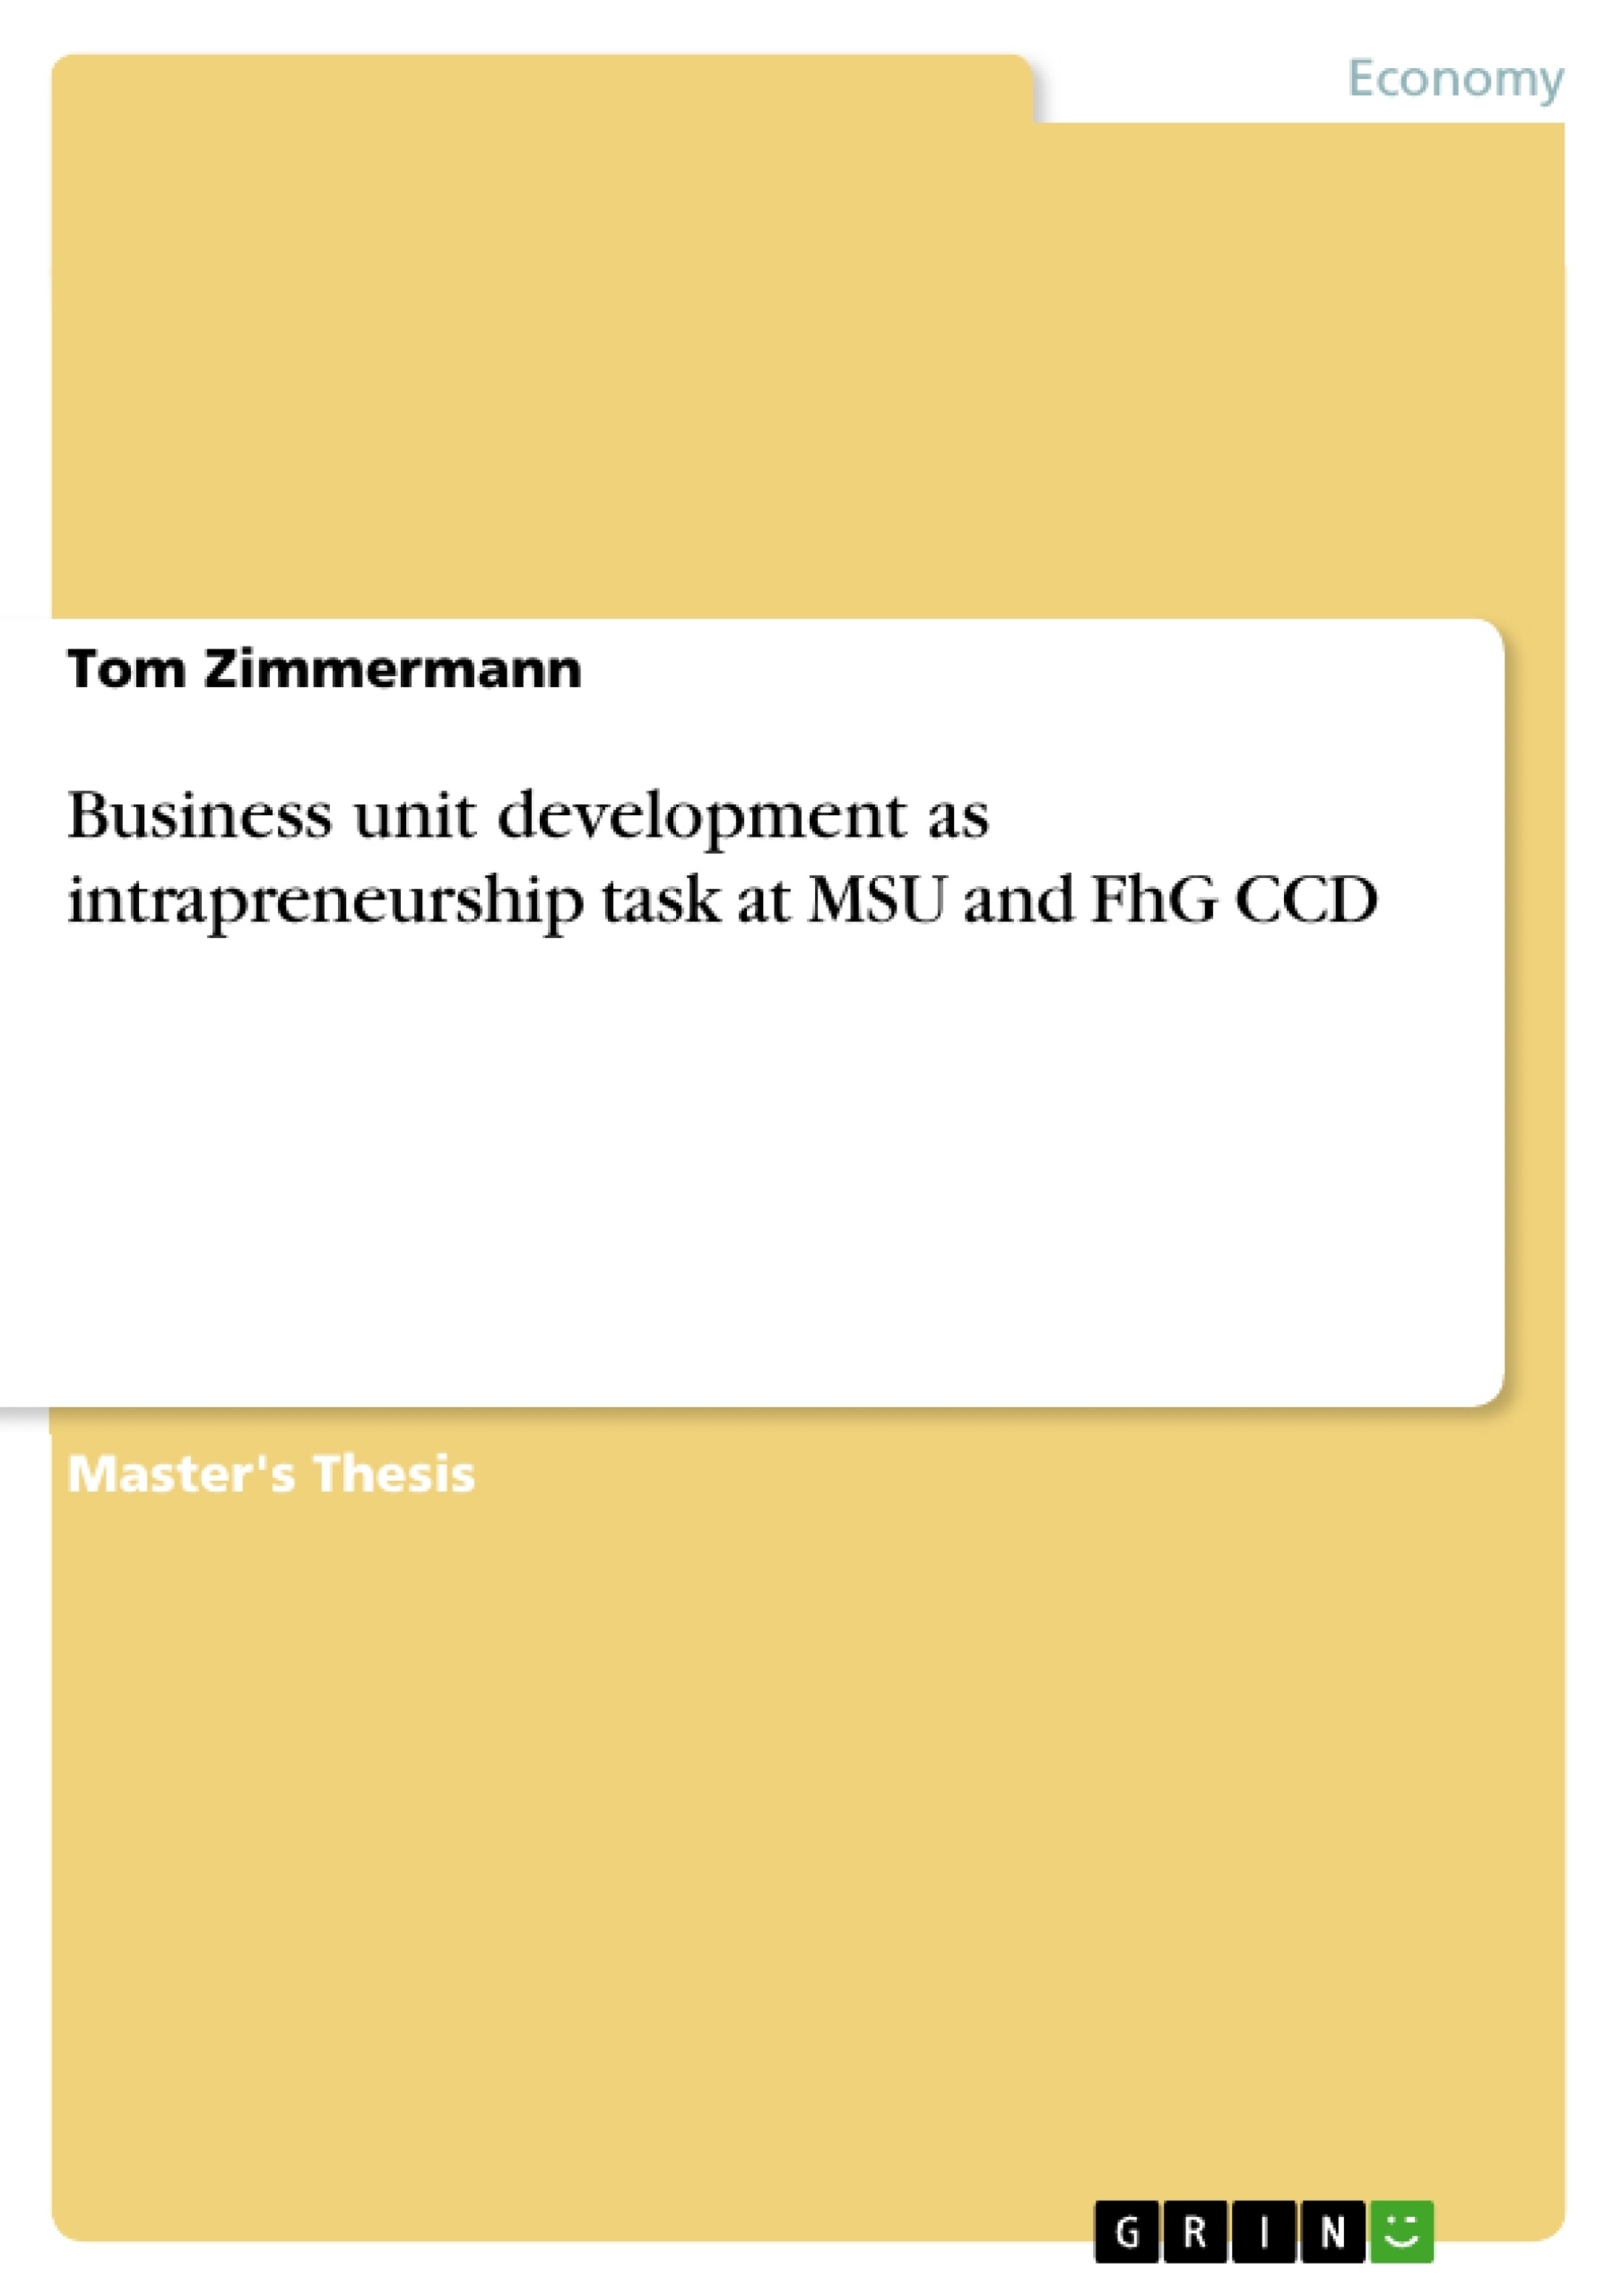 Title: Business unit development as intrapreneurship task at MSU and FhG CCD